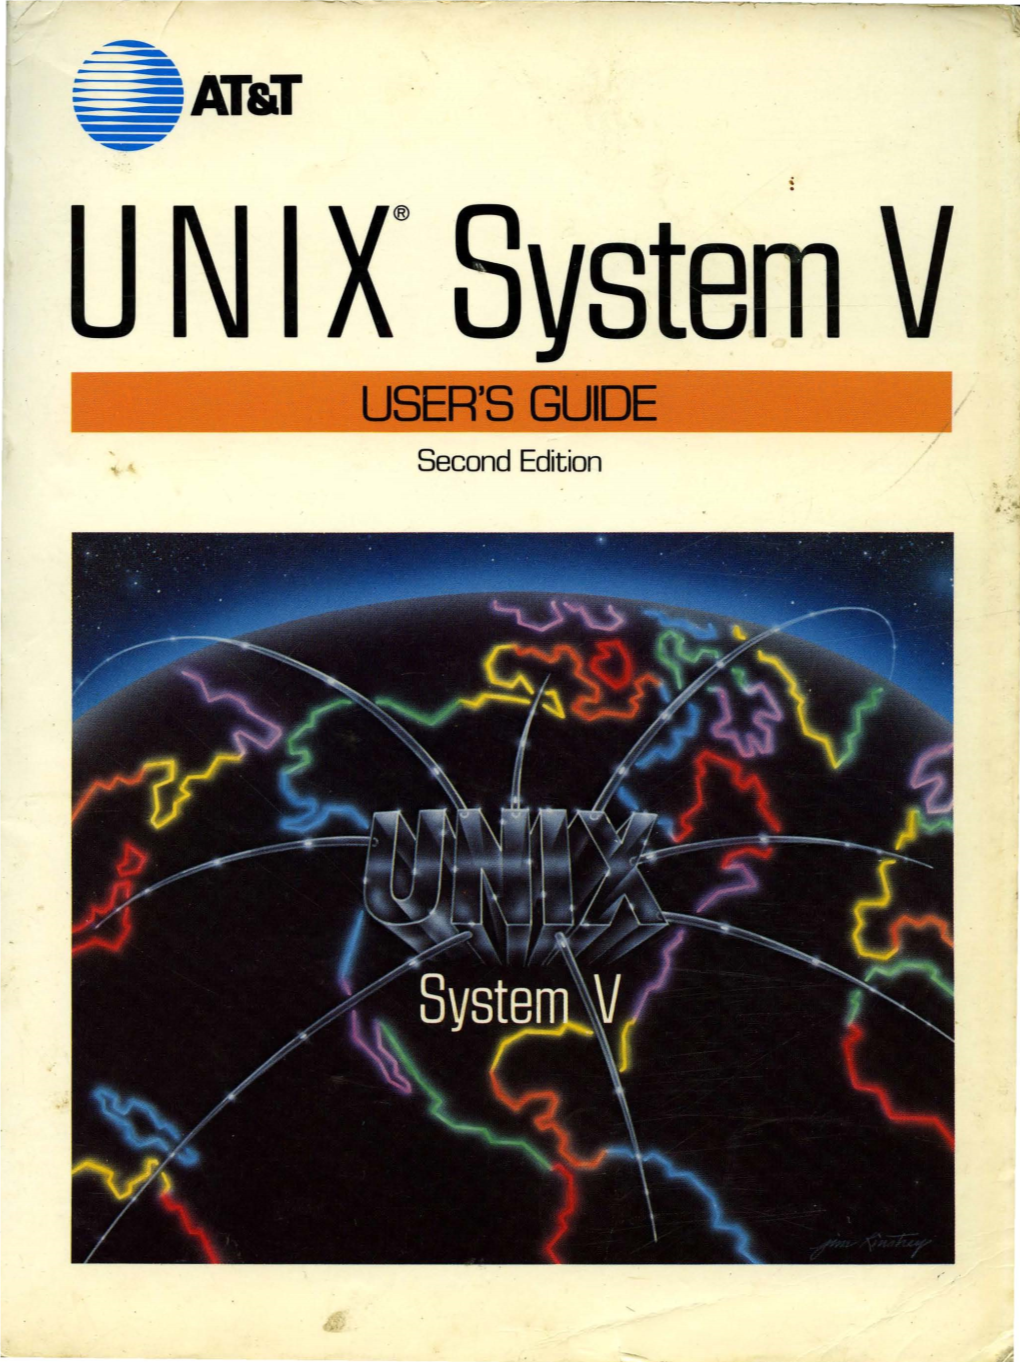 UNIX System V User's Guide Second Edition